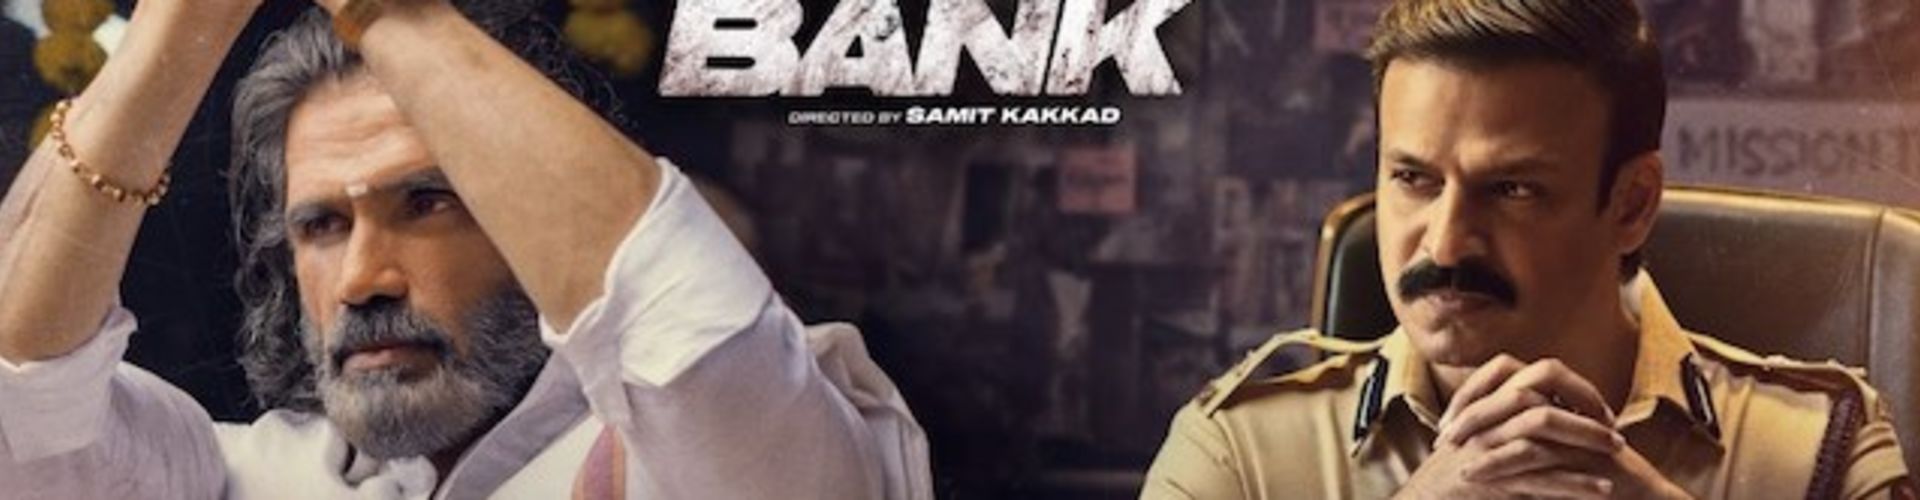 Dharavi Bank Trailer Is Out